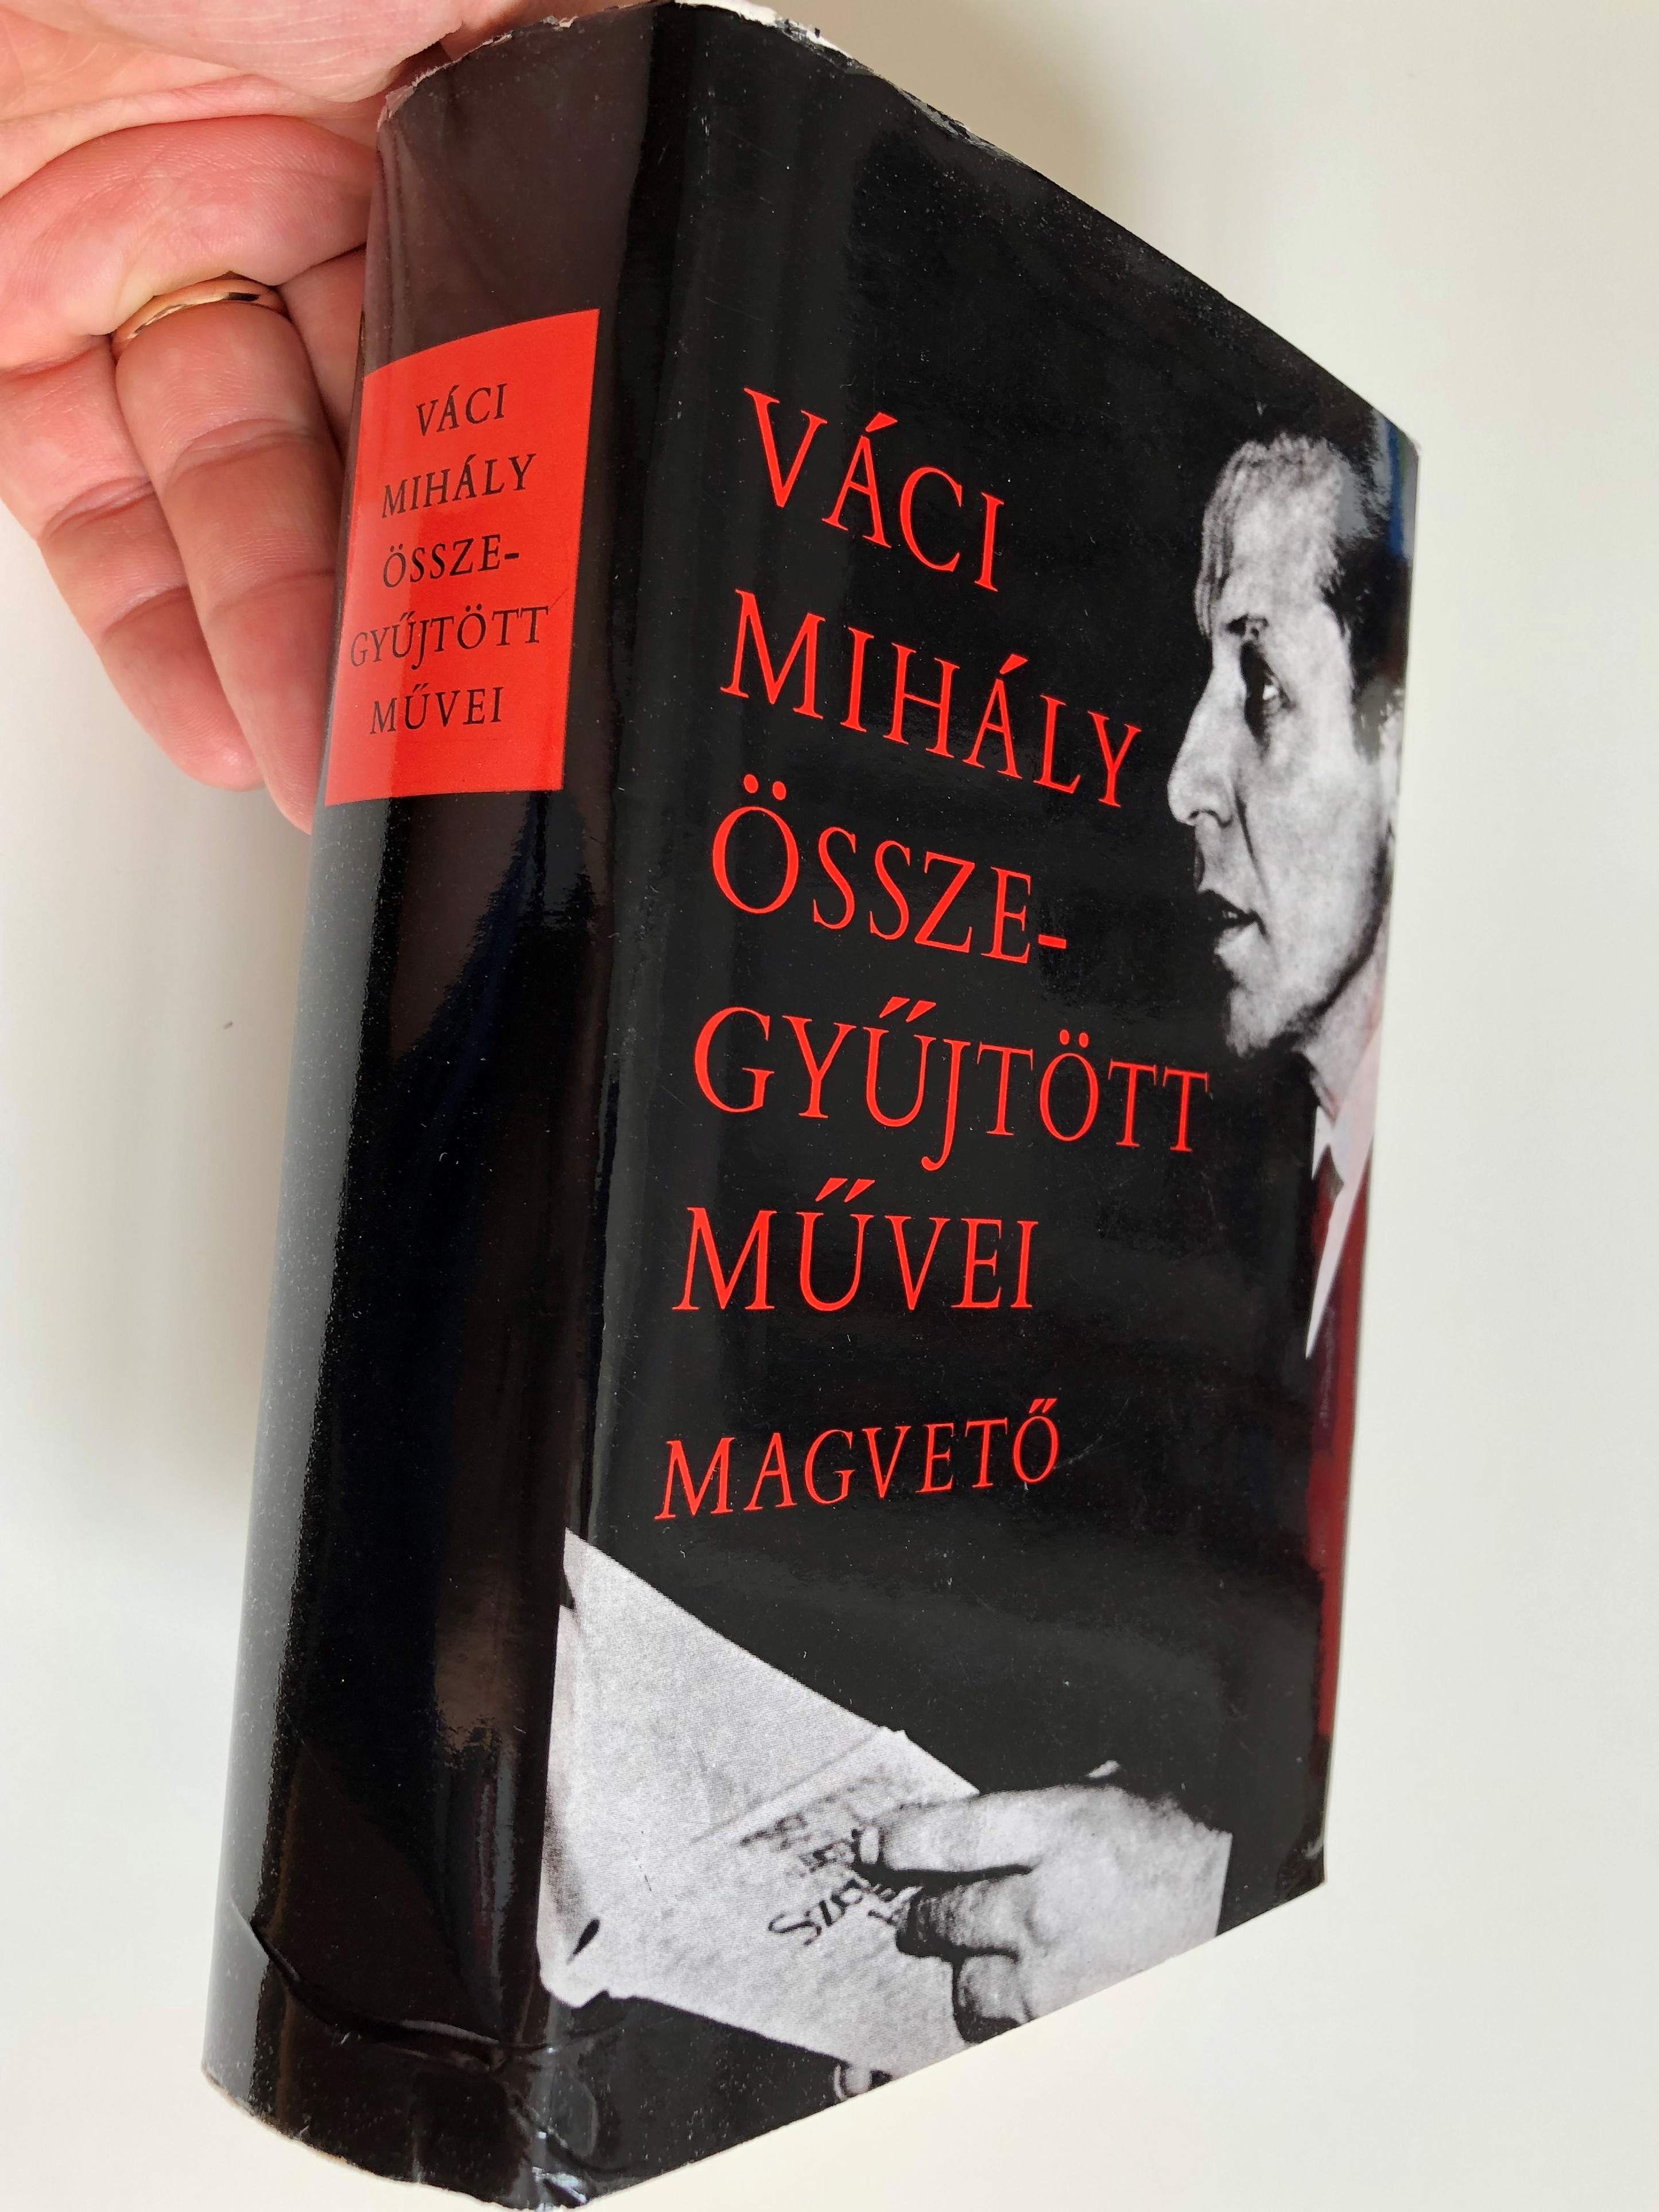 v-ci-mih-ly-sszegy-jt-tt-m-vei-2nd-edition-collected-works-of-mih-ly-v-ci-in-hungarian-language-magvet-1979-2-.jpg